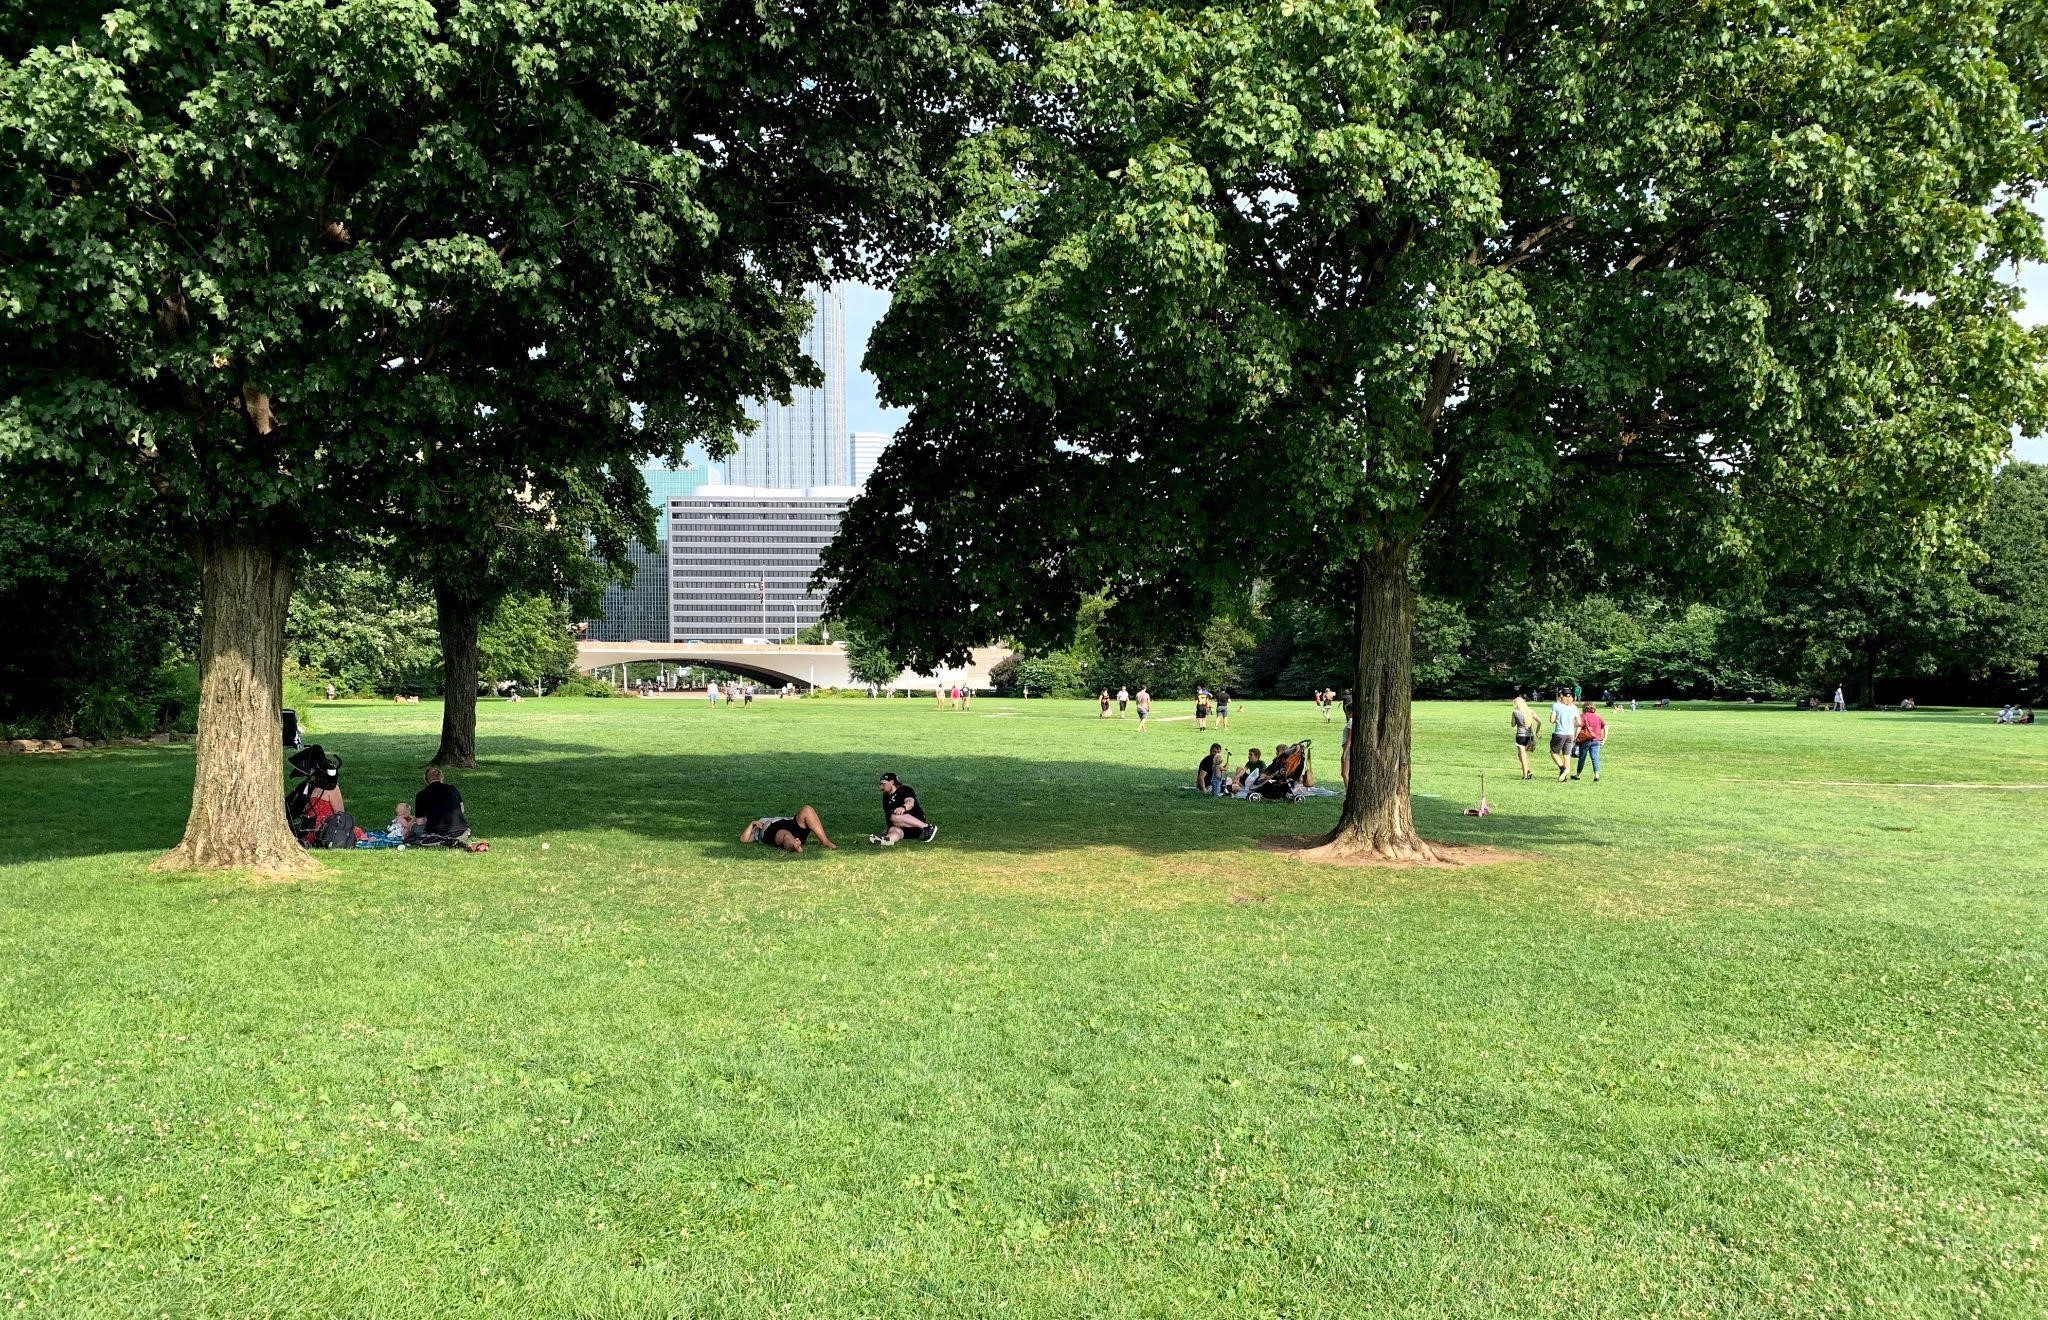 A park with several groups of people lounging beneath trees